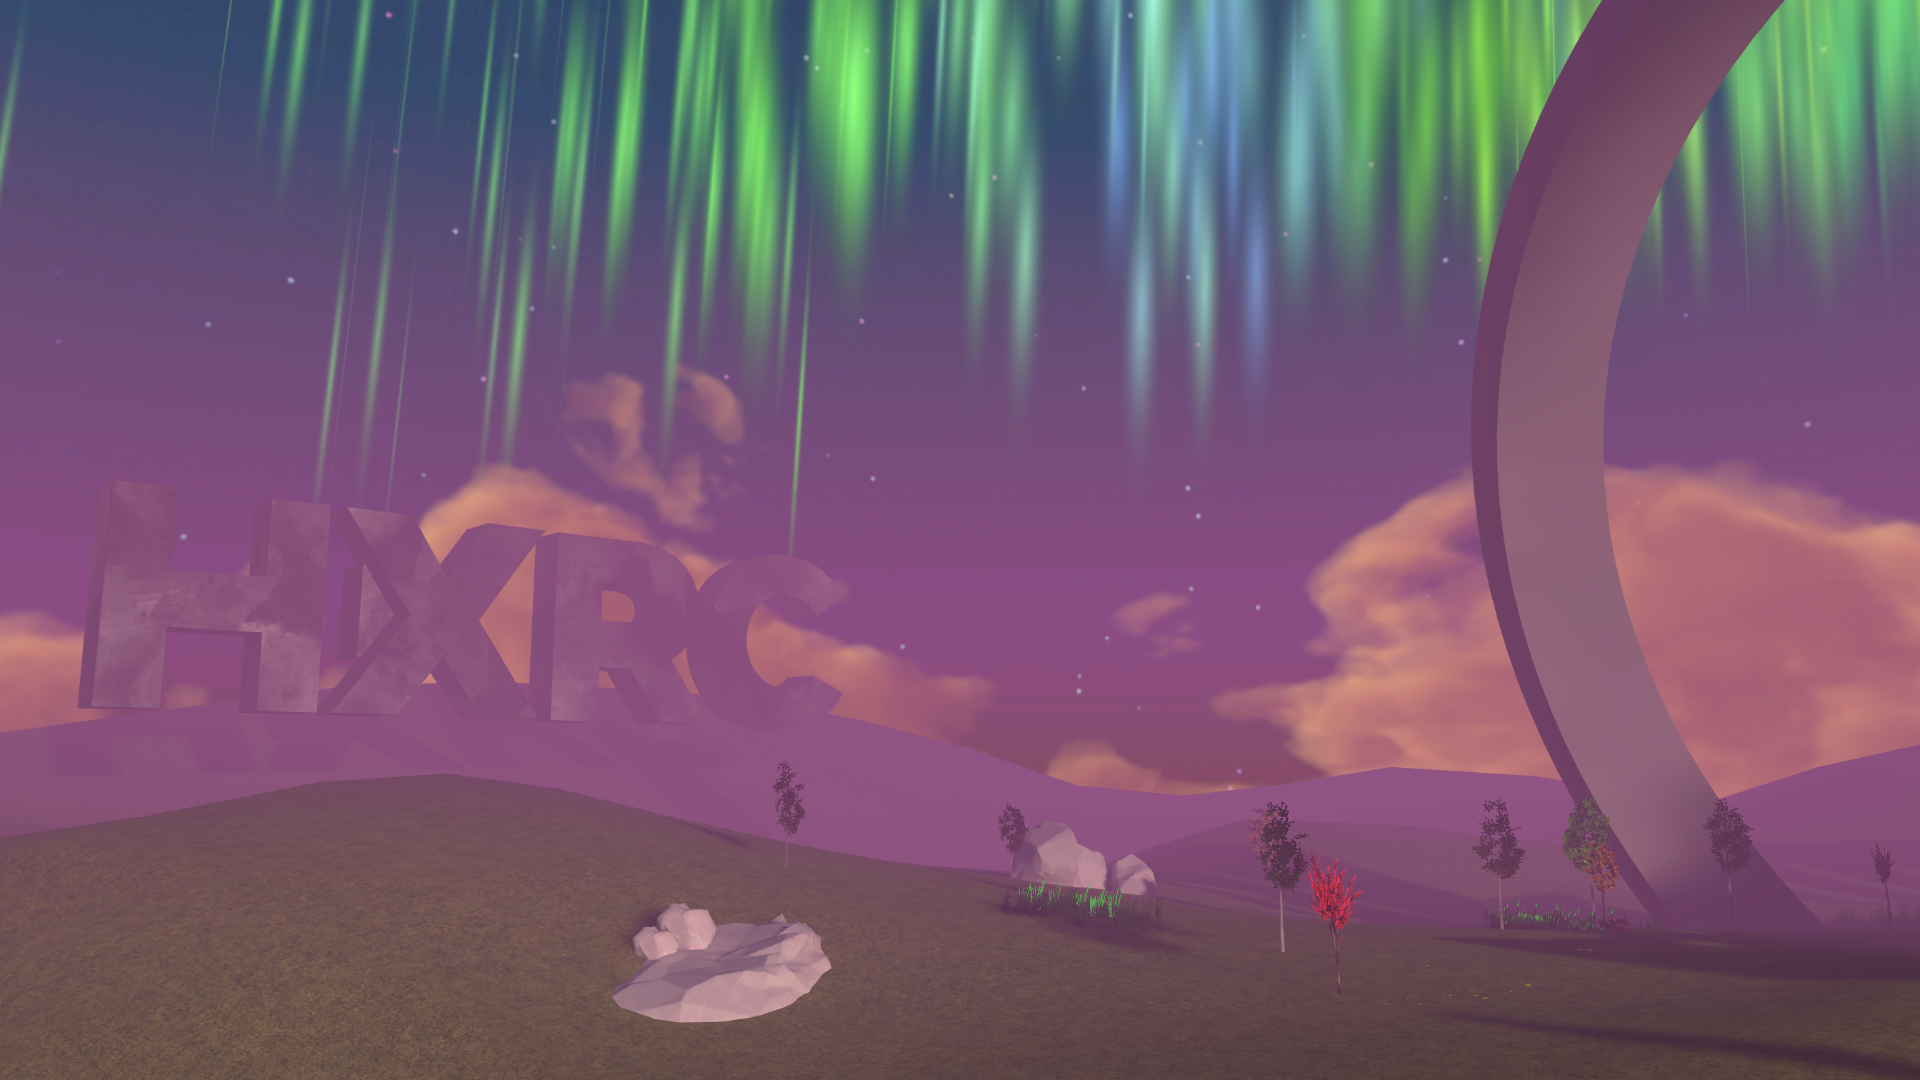 Screenshot from AltspaceVR digital world, showing a sunset sky and aurora borealis.